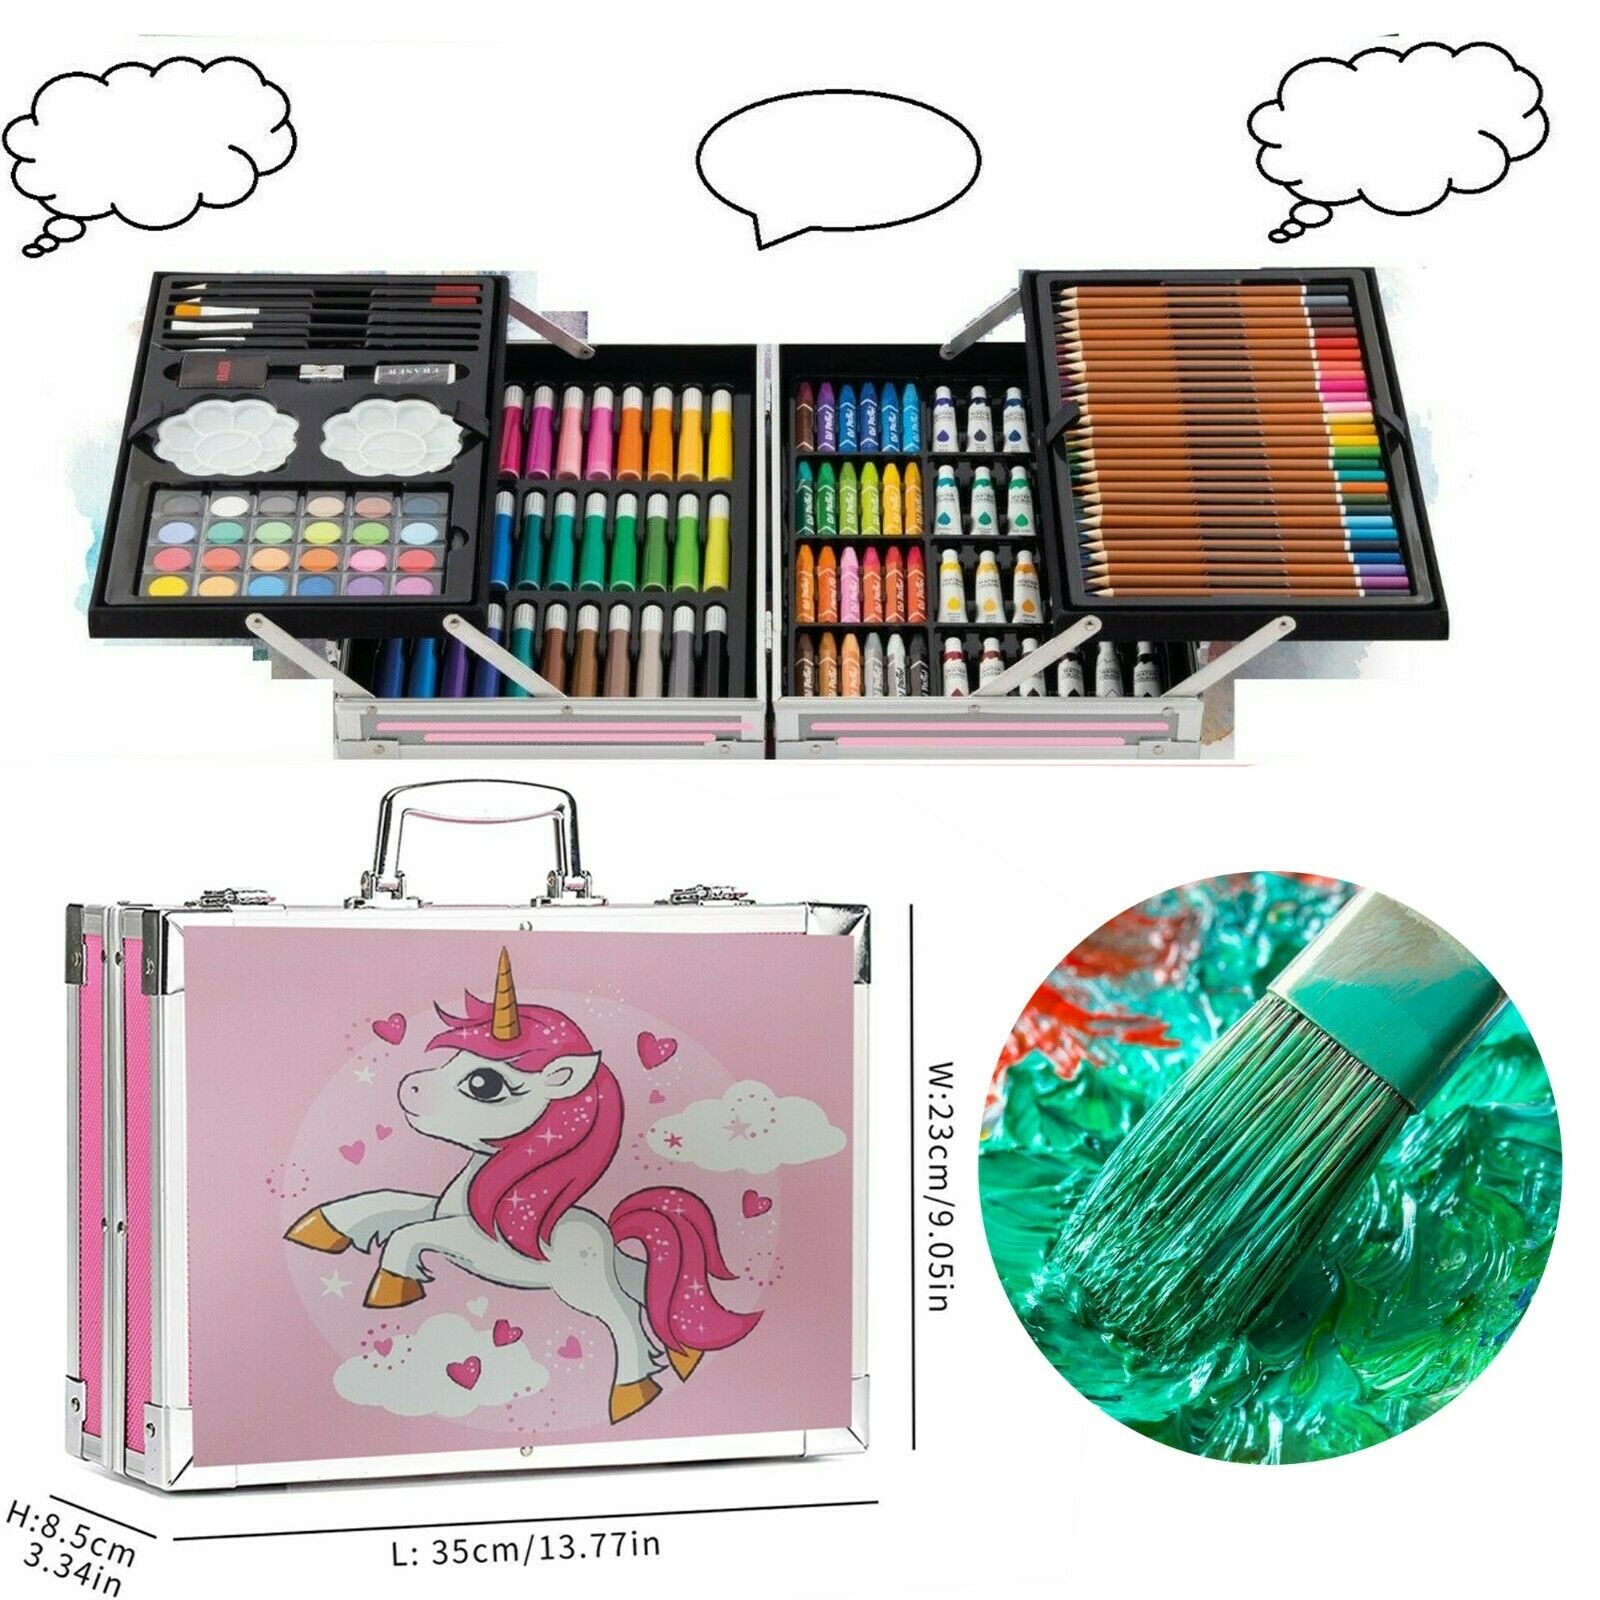 Suitcase Colour Kit - Animal Art Kit For Kids with Multicolor